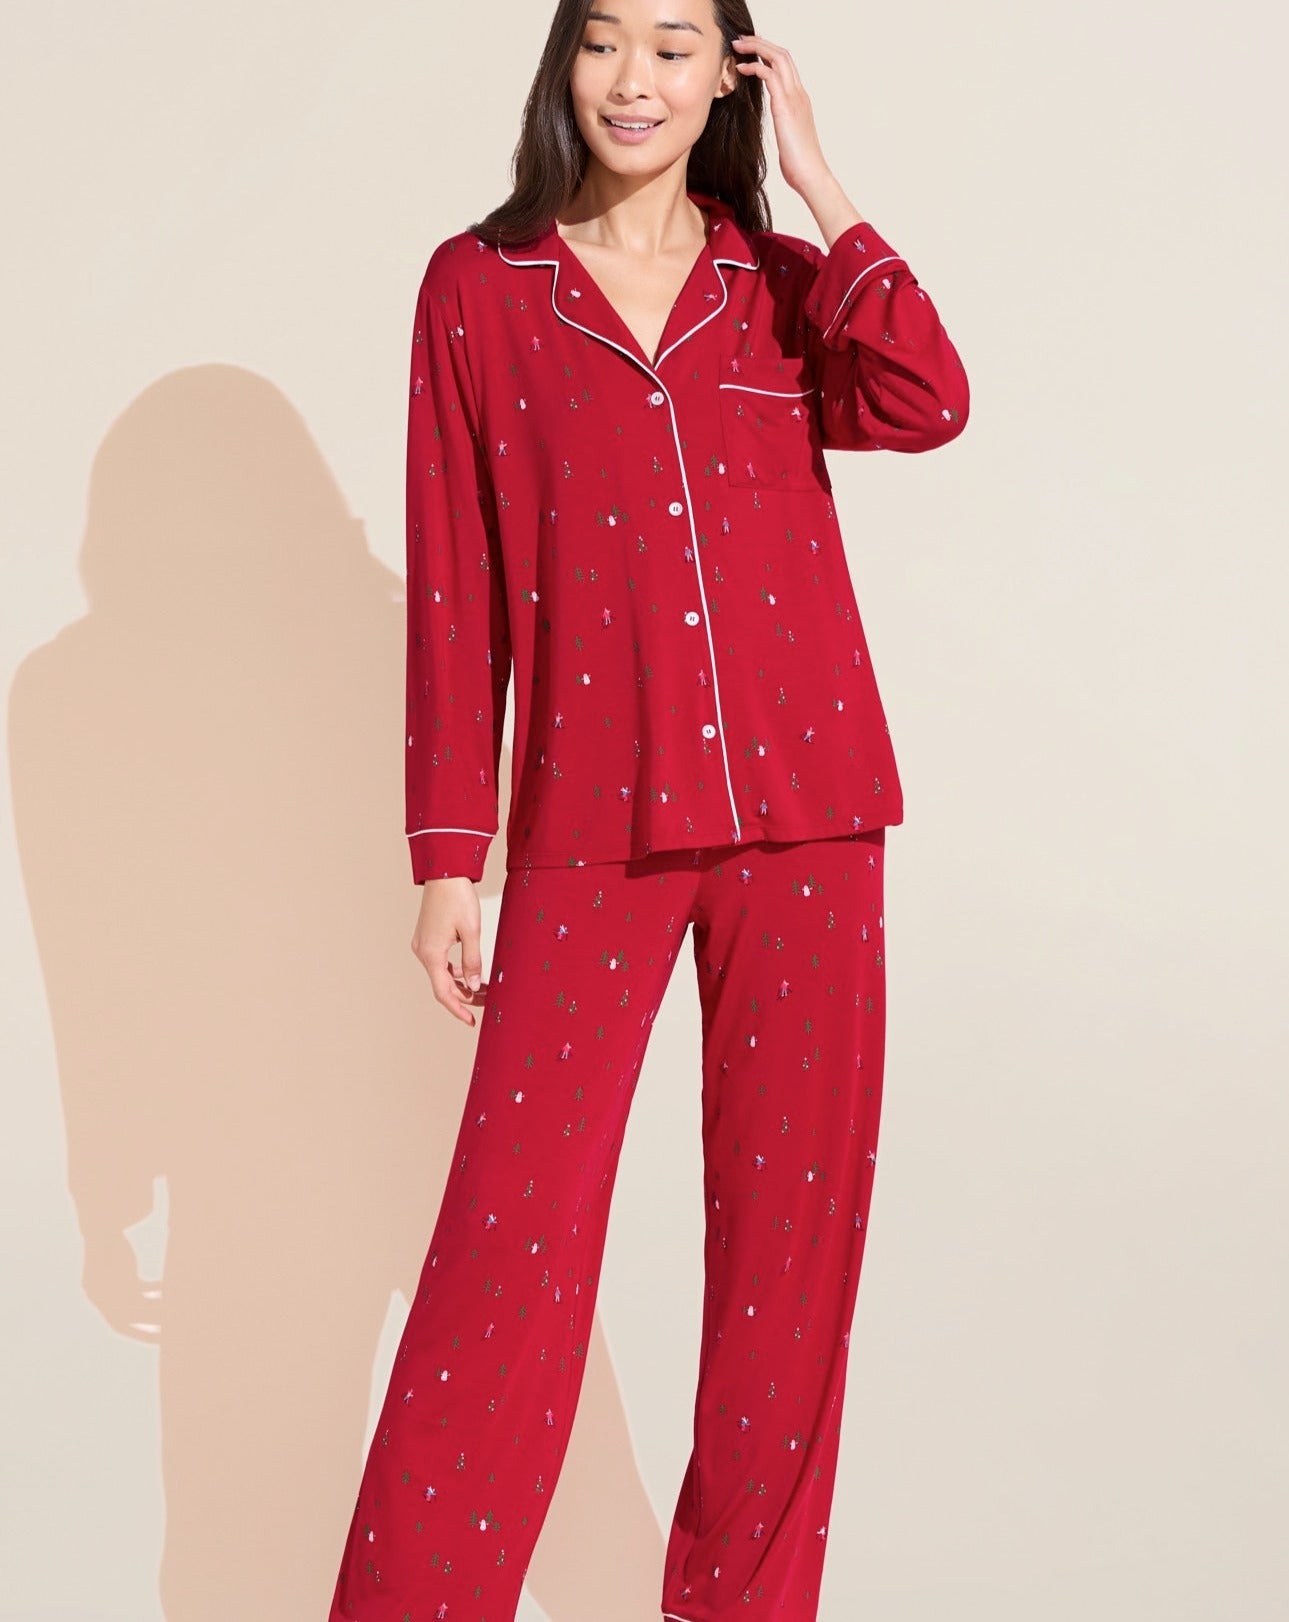 Gisele Printed Pajama: Limited Holiday Edition - Beestung Lingerie